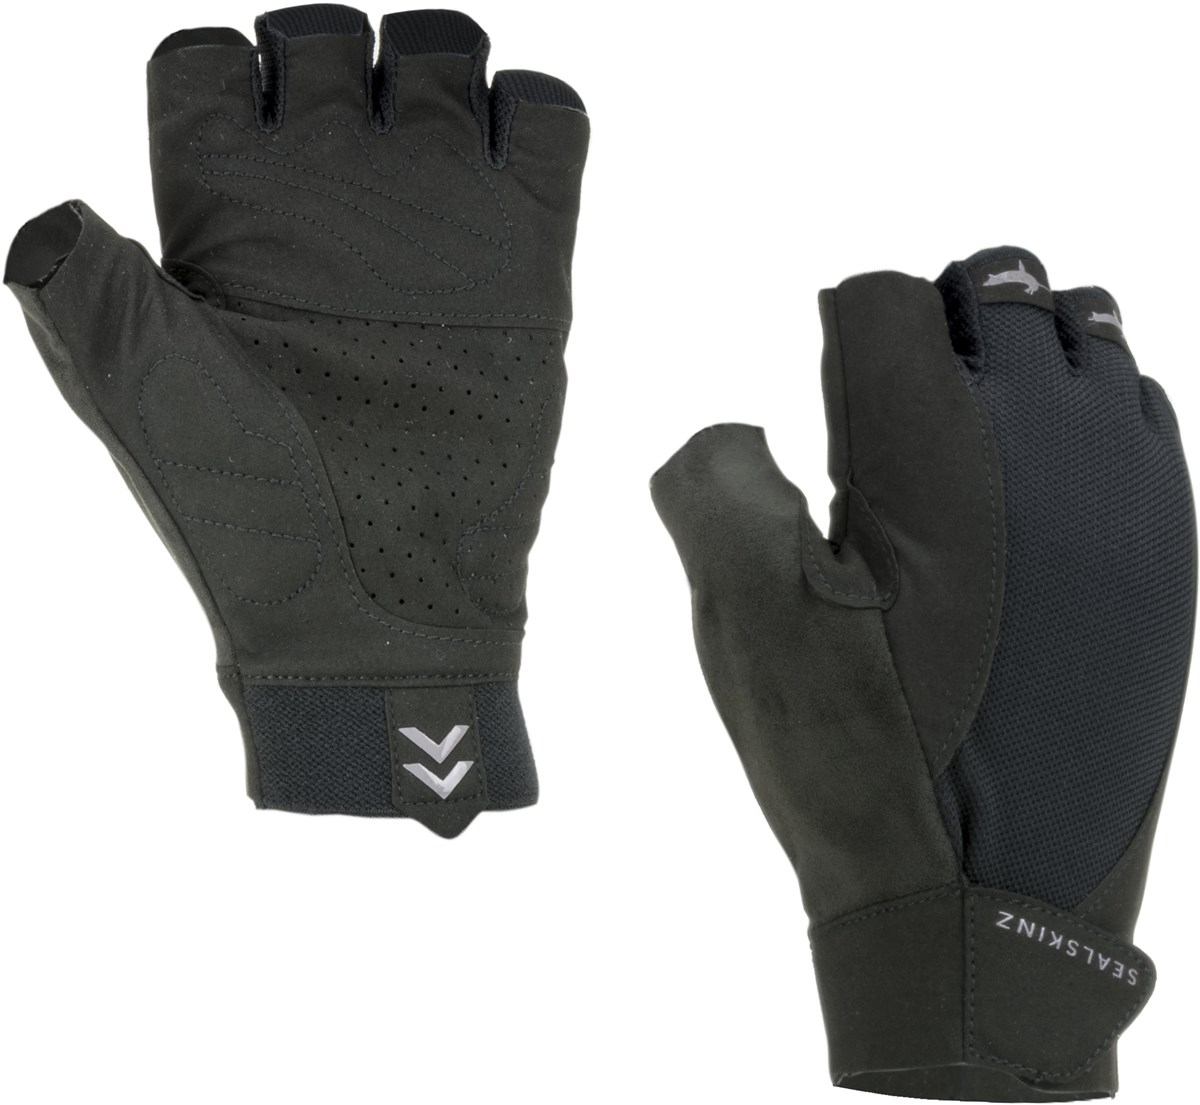 Sealskinz Fingerless Solo Cycle Glove product image